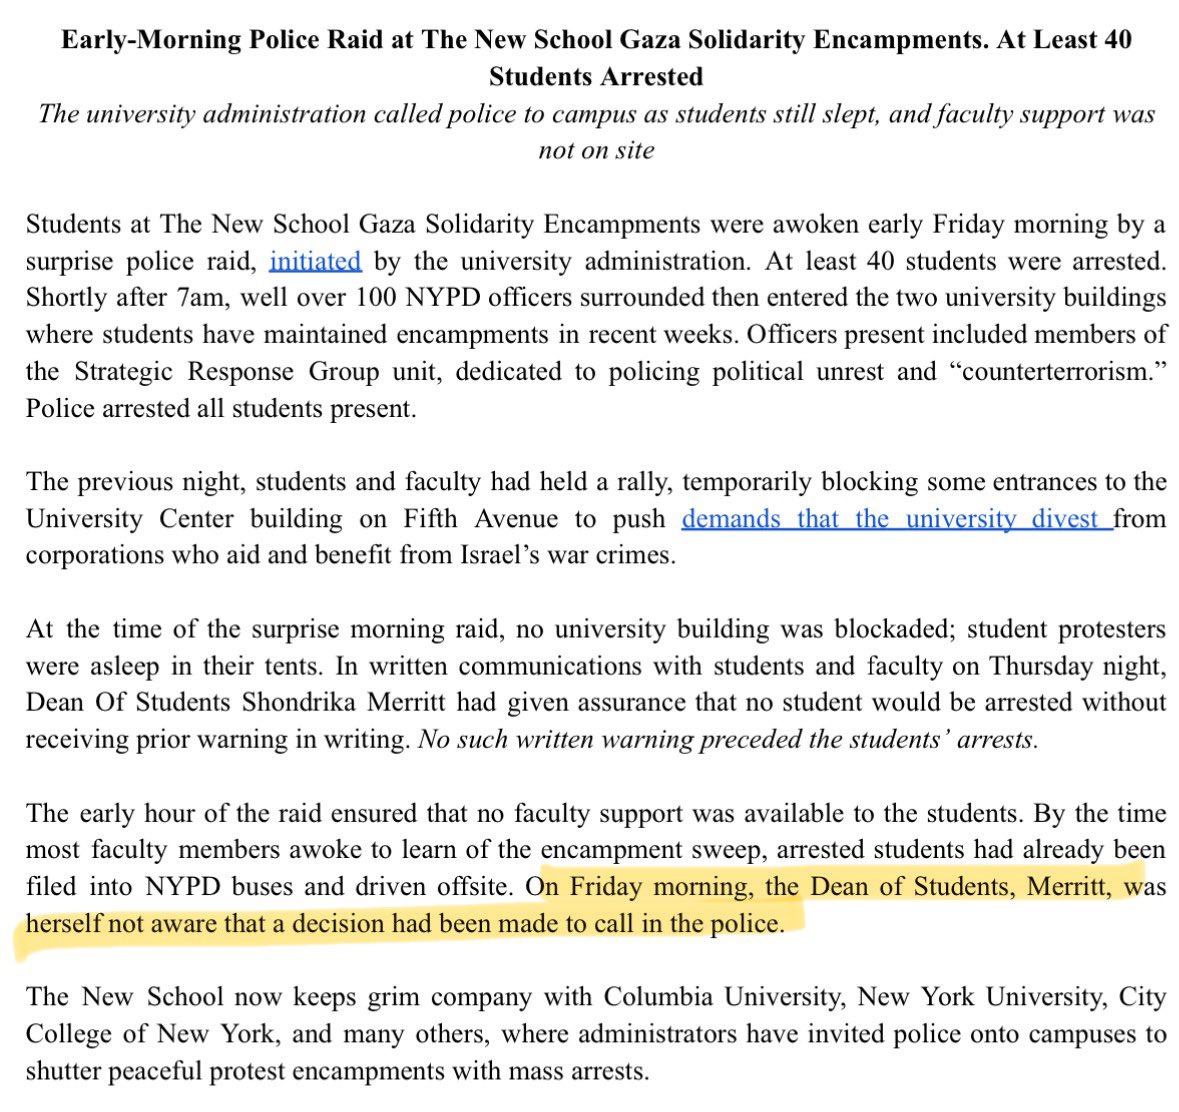 Statement from The New School SJP states that *the Dean of Students herself* had no idea consent had been given to the NYPD to raid the encampment, after previously assuring students no one would be arrested without prior *written* warning.